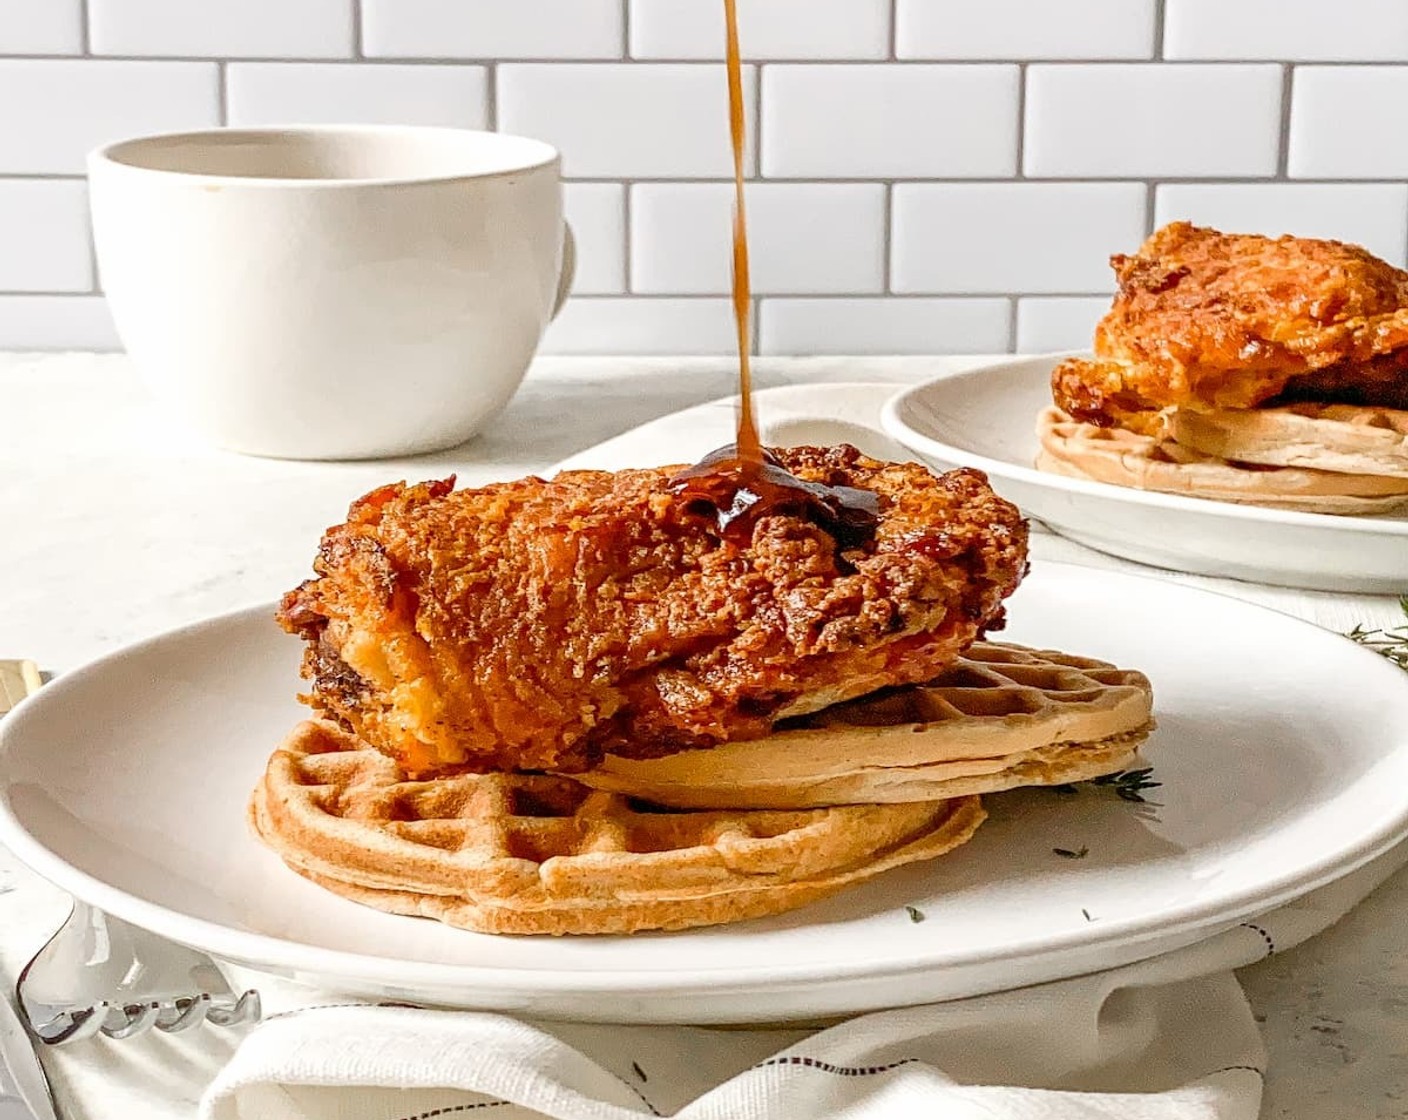 Make Hot And Crispy Waffles In Minutes With These Smart Waffle Makers